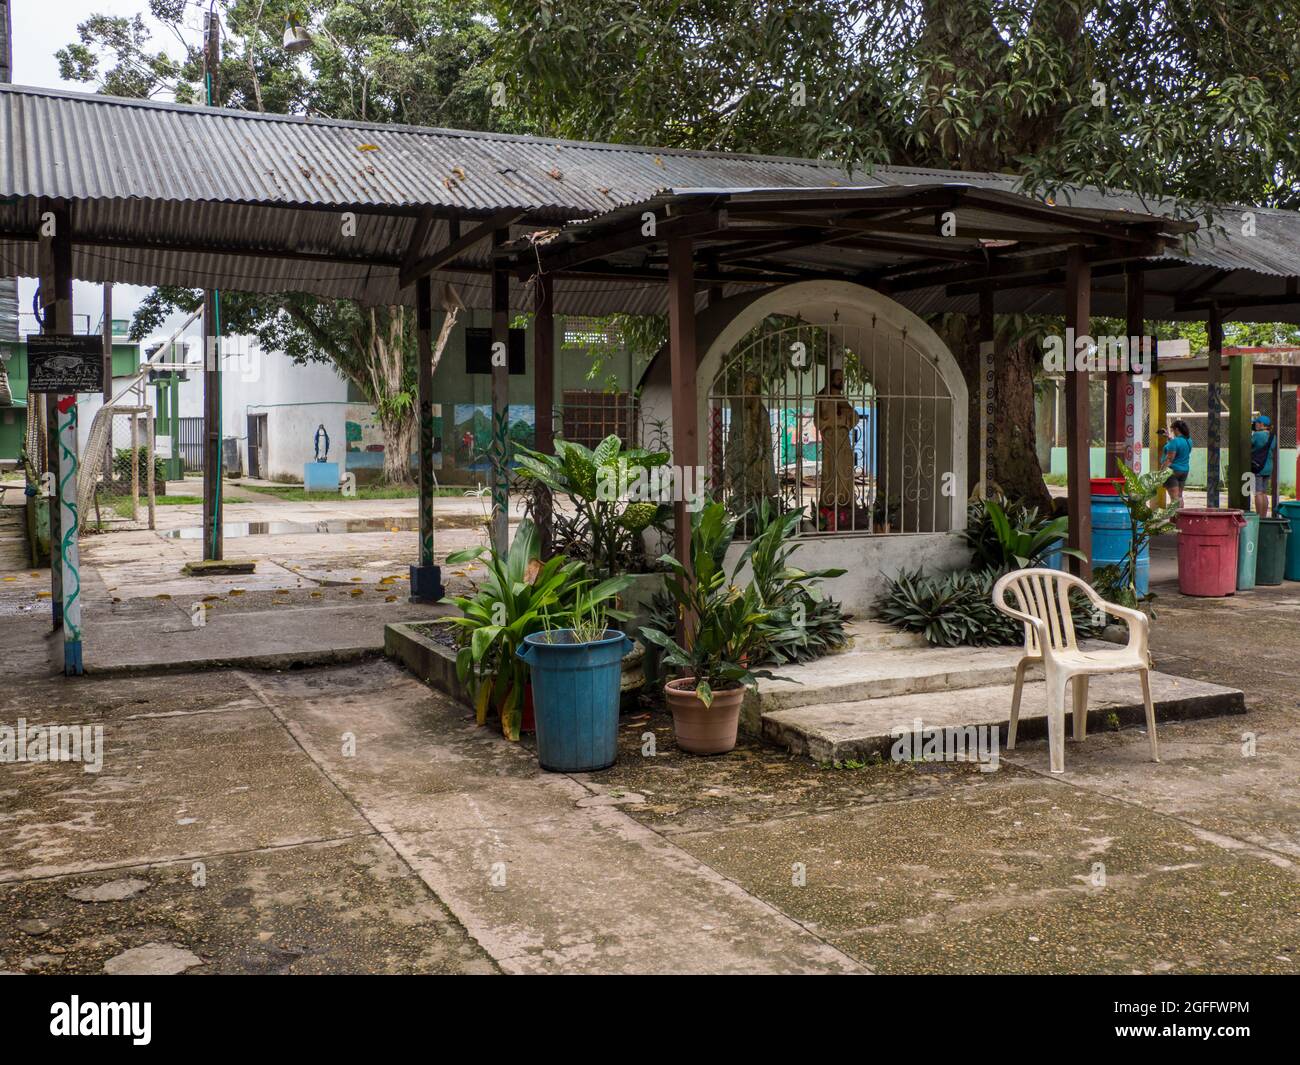 Leticia, Colombia - November 2019: Chapel in the courtyard of an elementary school in a small town in the Amazon, Amazon, Latin America. Stock Photo